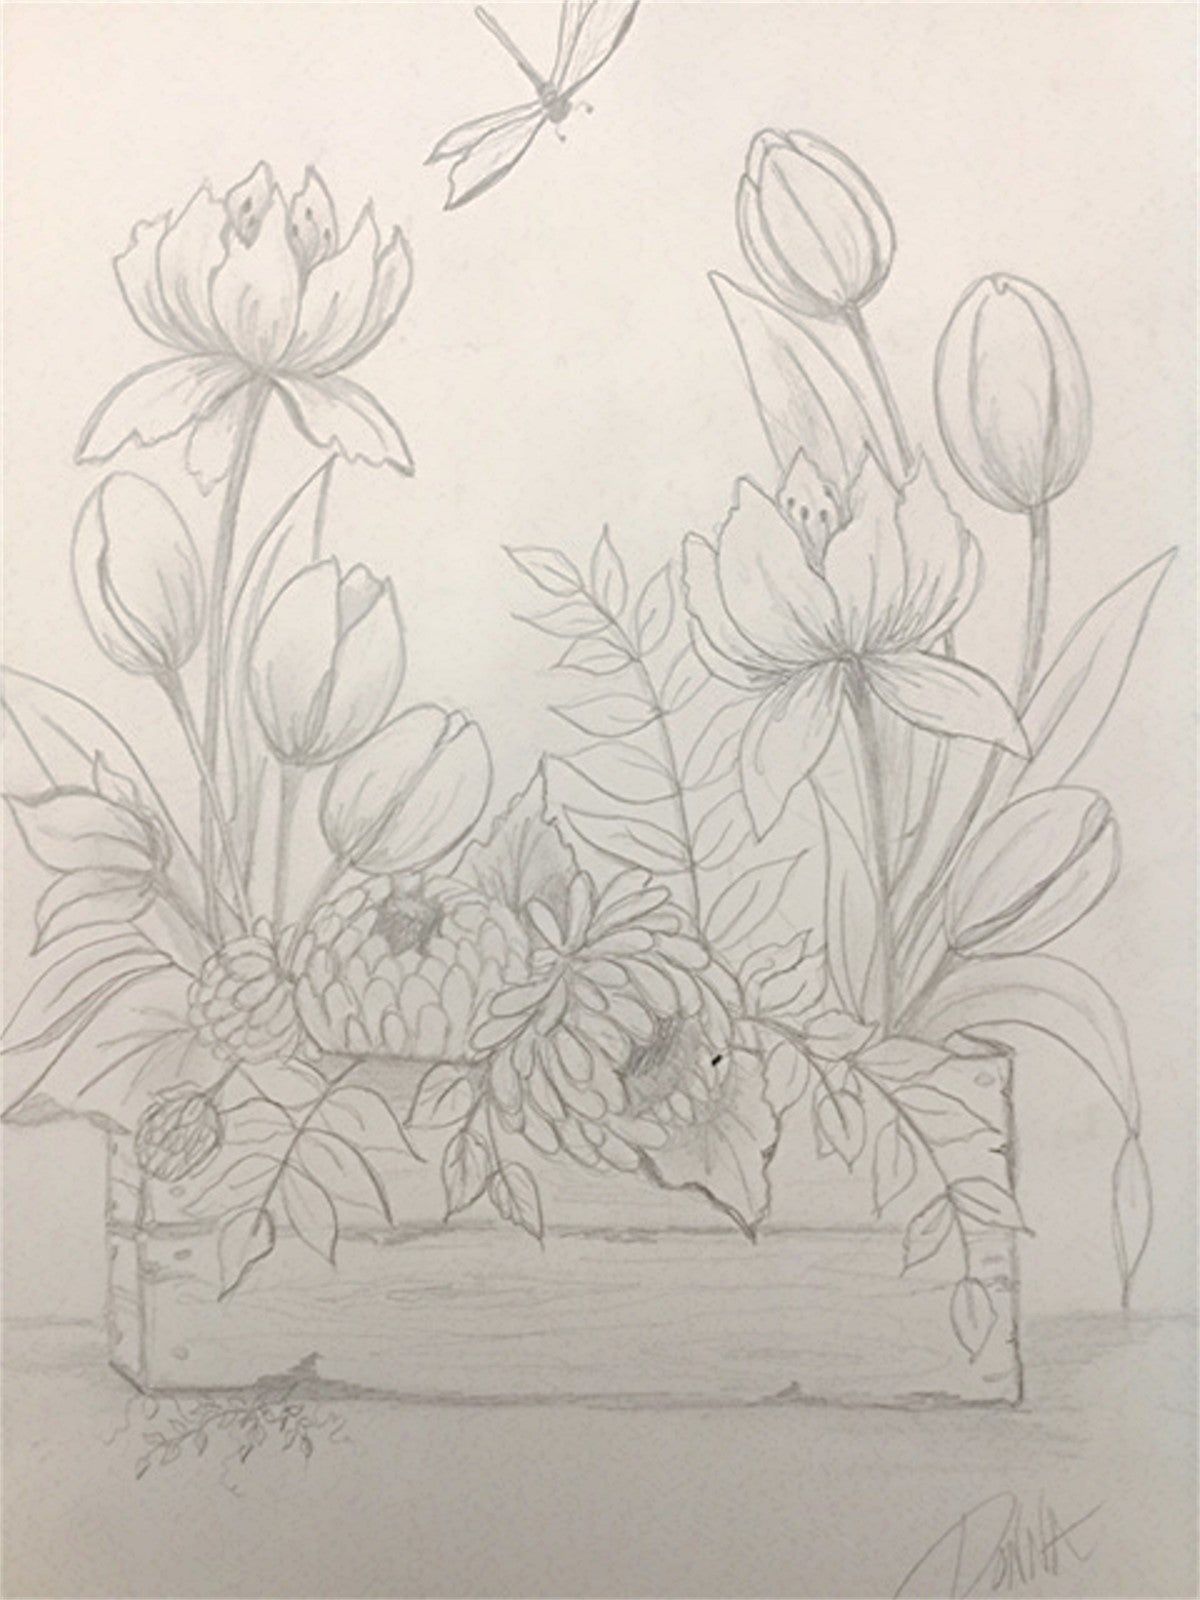 Drawing Series 4 - Lesson 1 Flower Box - Downloadable Video Lesson